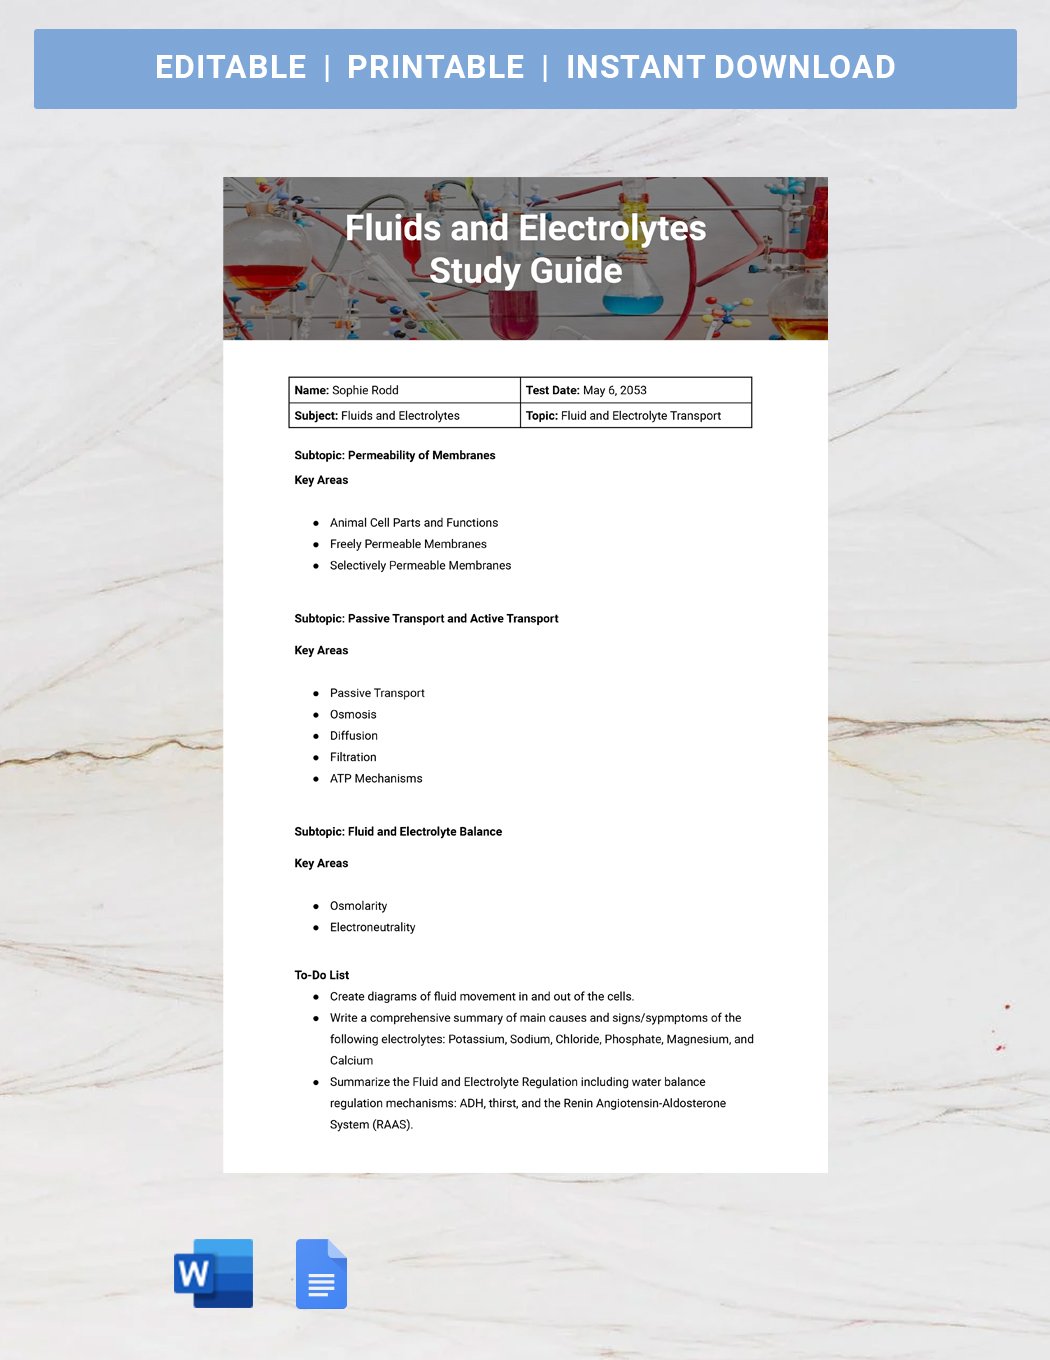 Fluids and Electrolytes Study Guide Template